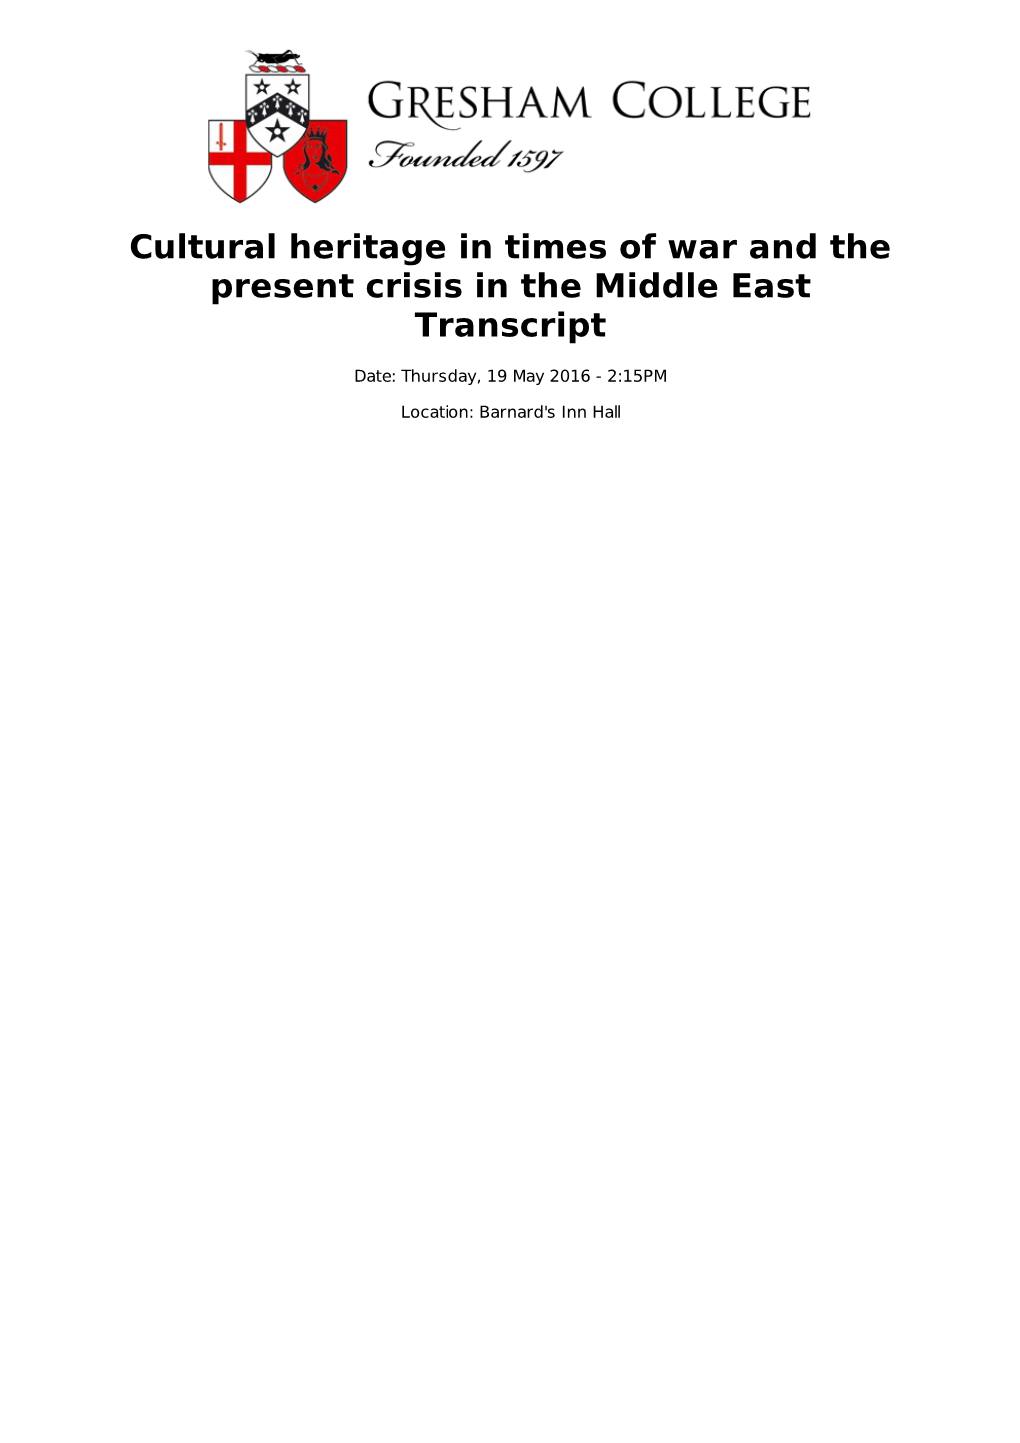 Cultural Heritage in Times of War and the Present Crisis in the Middle East Transcript